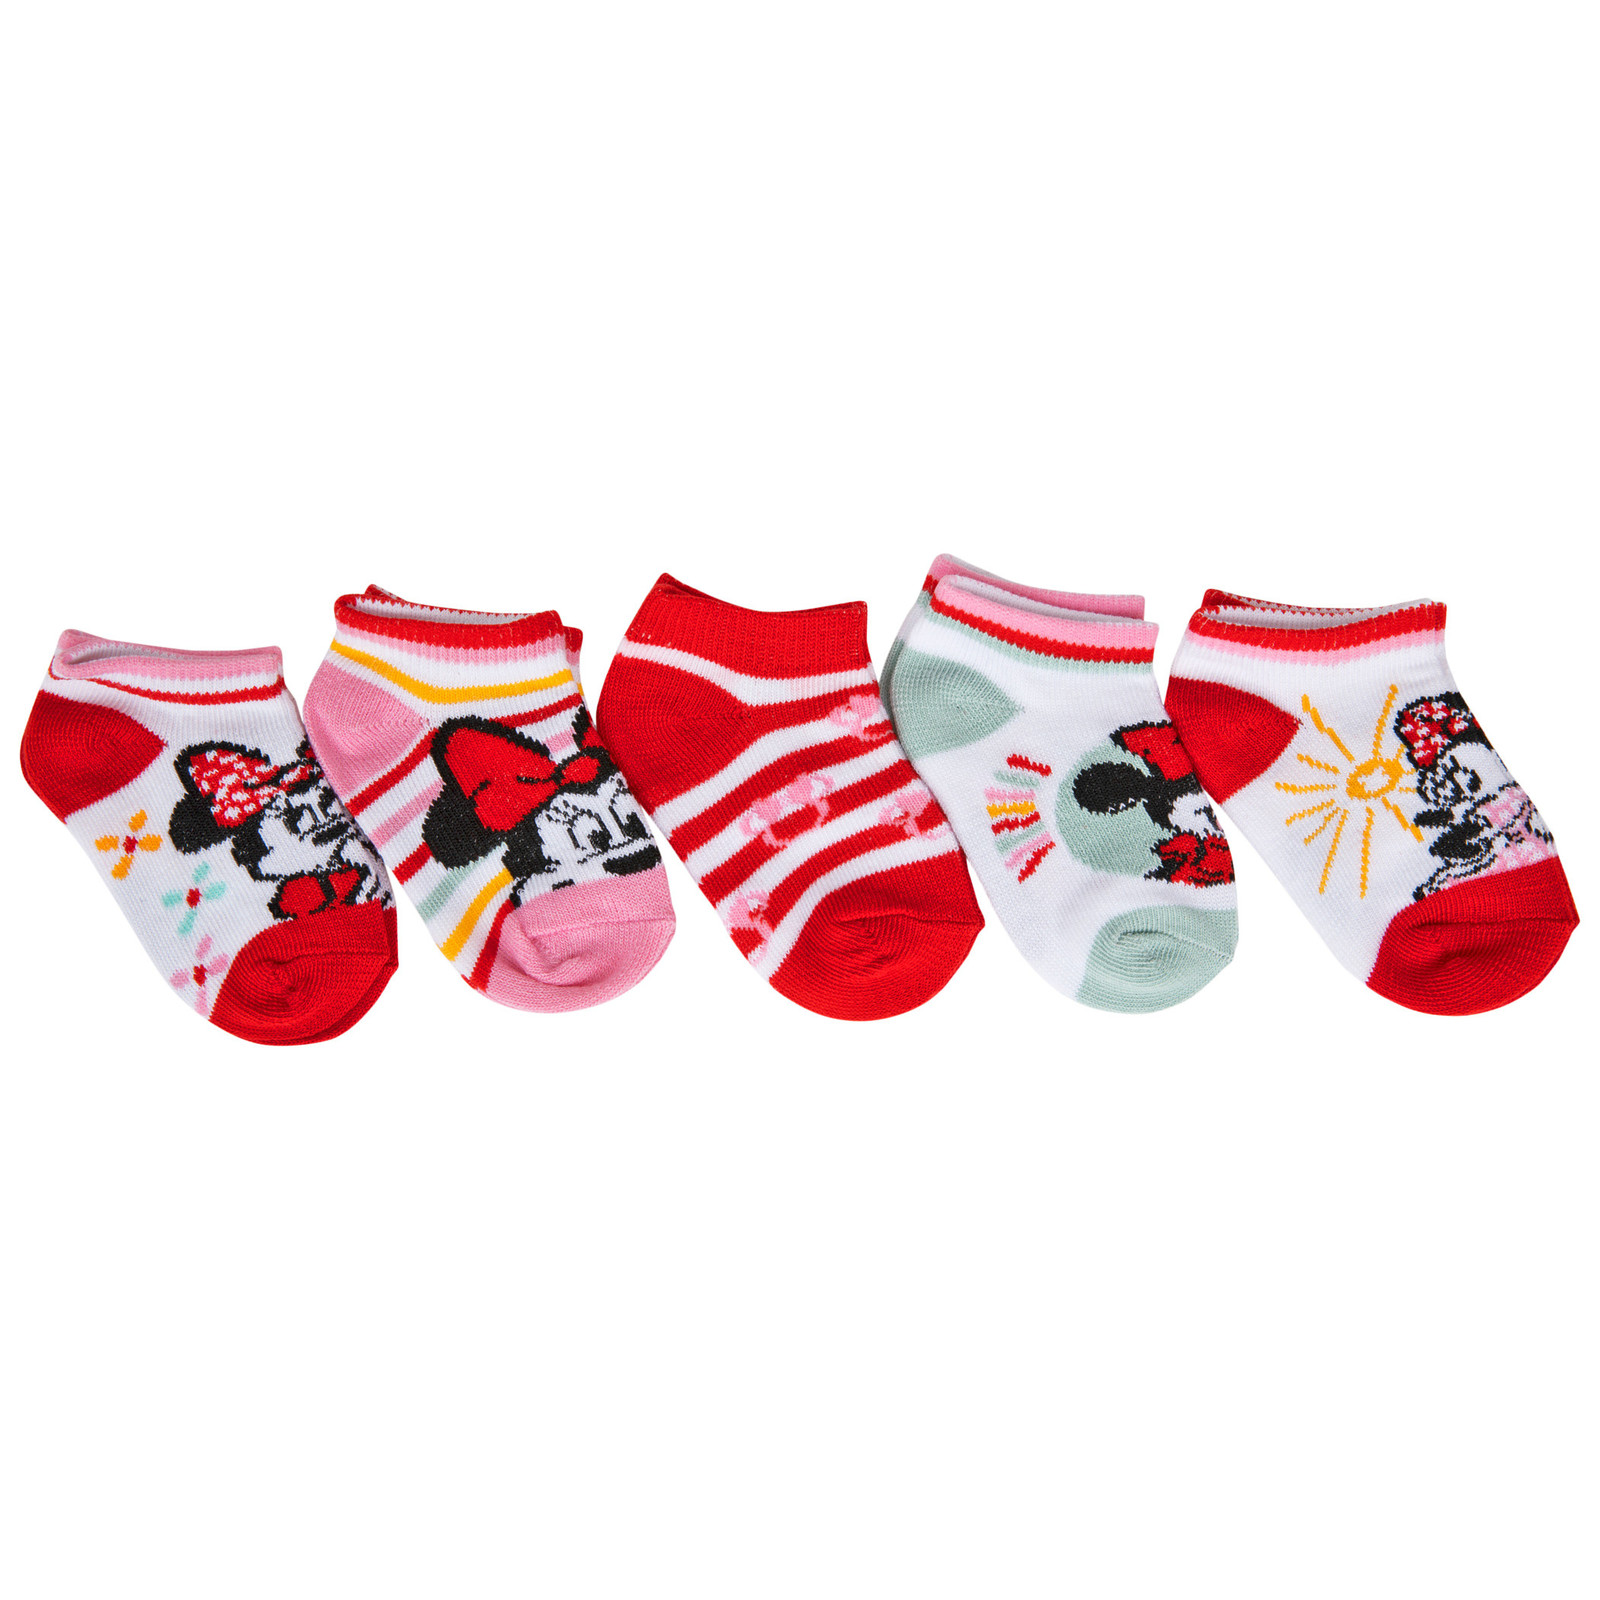 Primary image for Disney Minnie Mouse Since Forever Toddler No Show Variety Socks 5-Pack Multi-Co